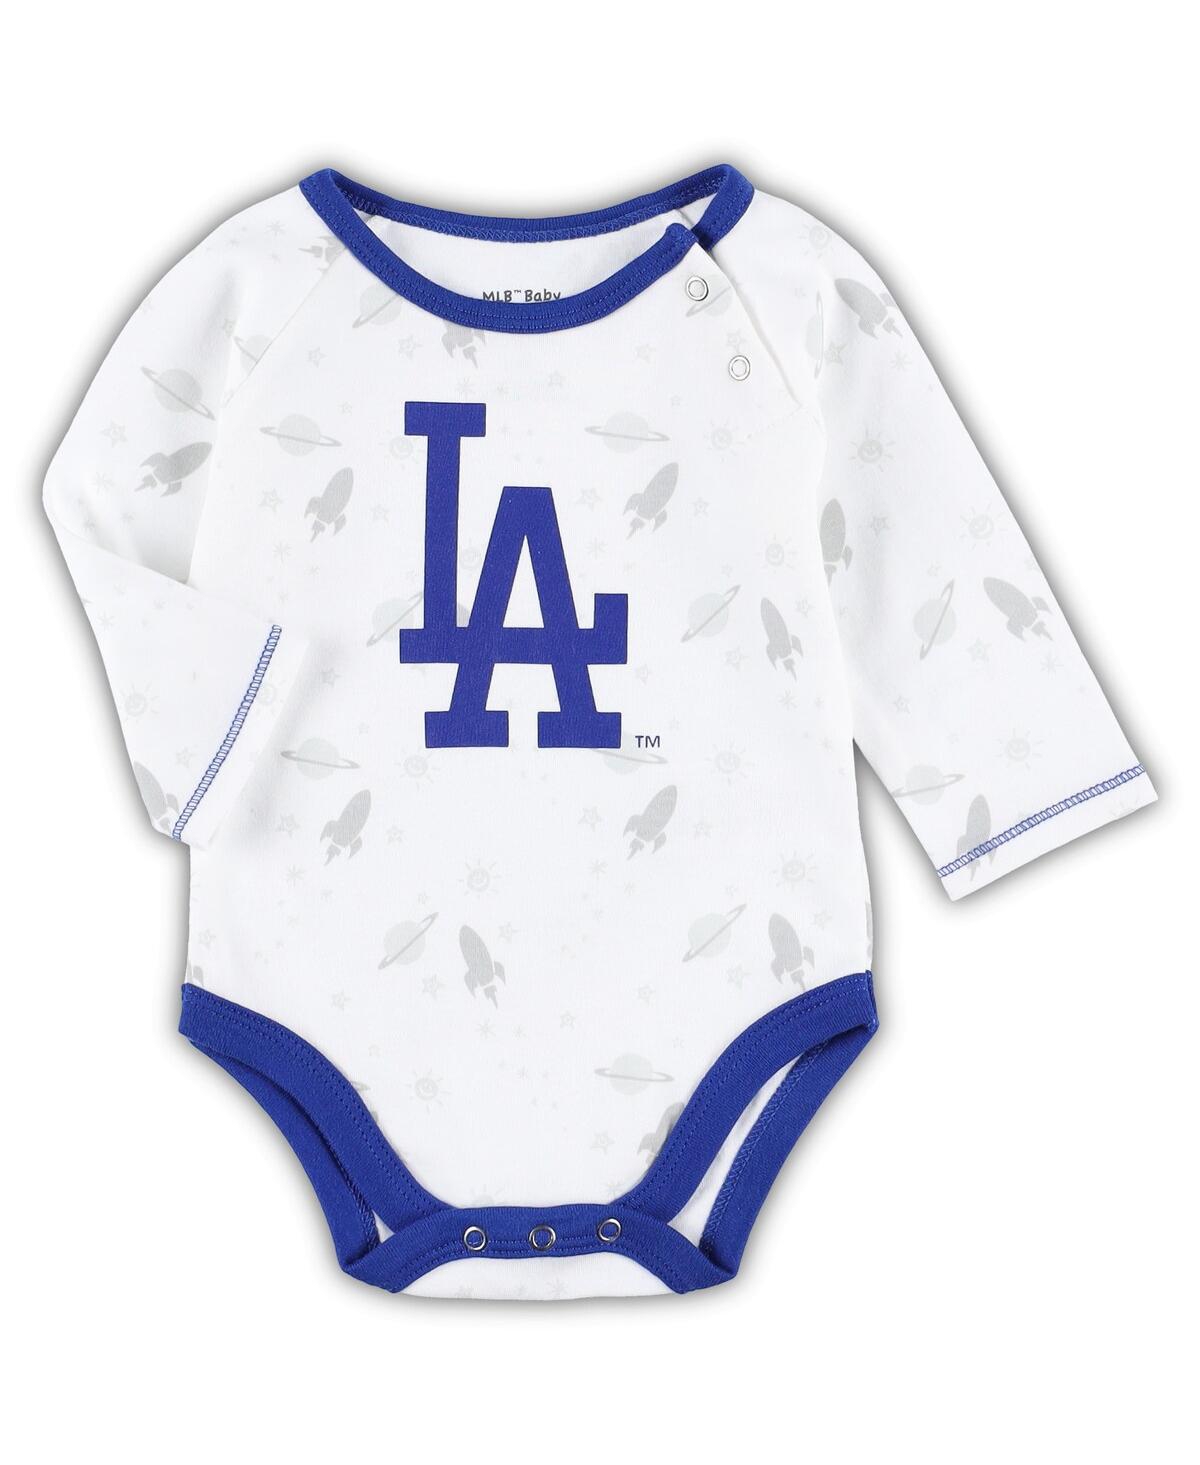 Shop Outerstuff Newborn And Infant Boys And Girls Royal, White Los Angeles Dodgers Dream Team Bodysuit Hat And Foote In Royal,white